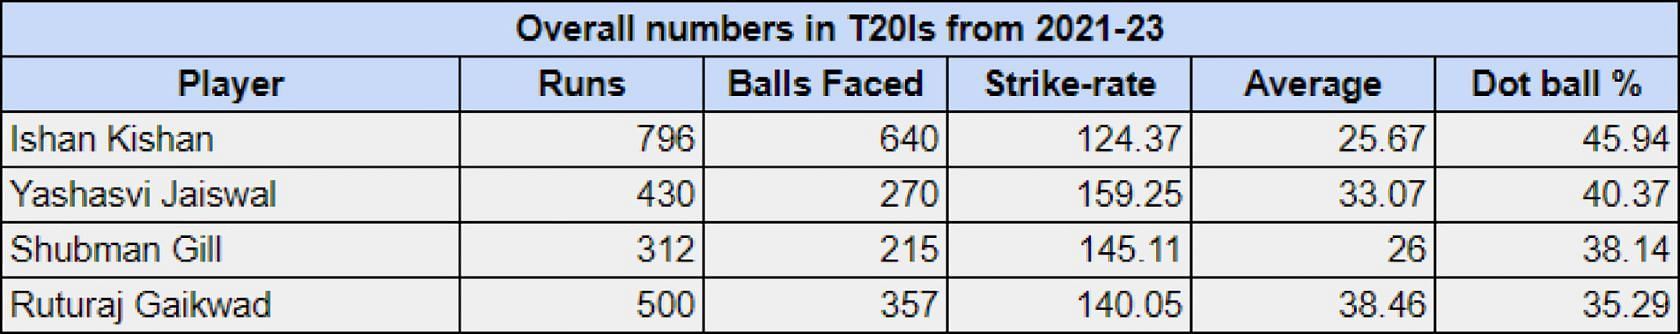 How do the numbers of the other Indian T20I openers stack up?